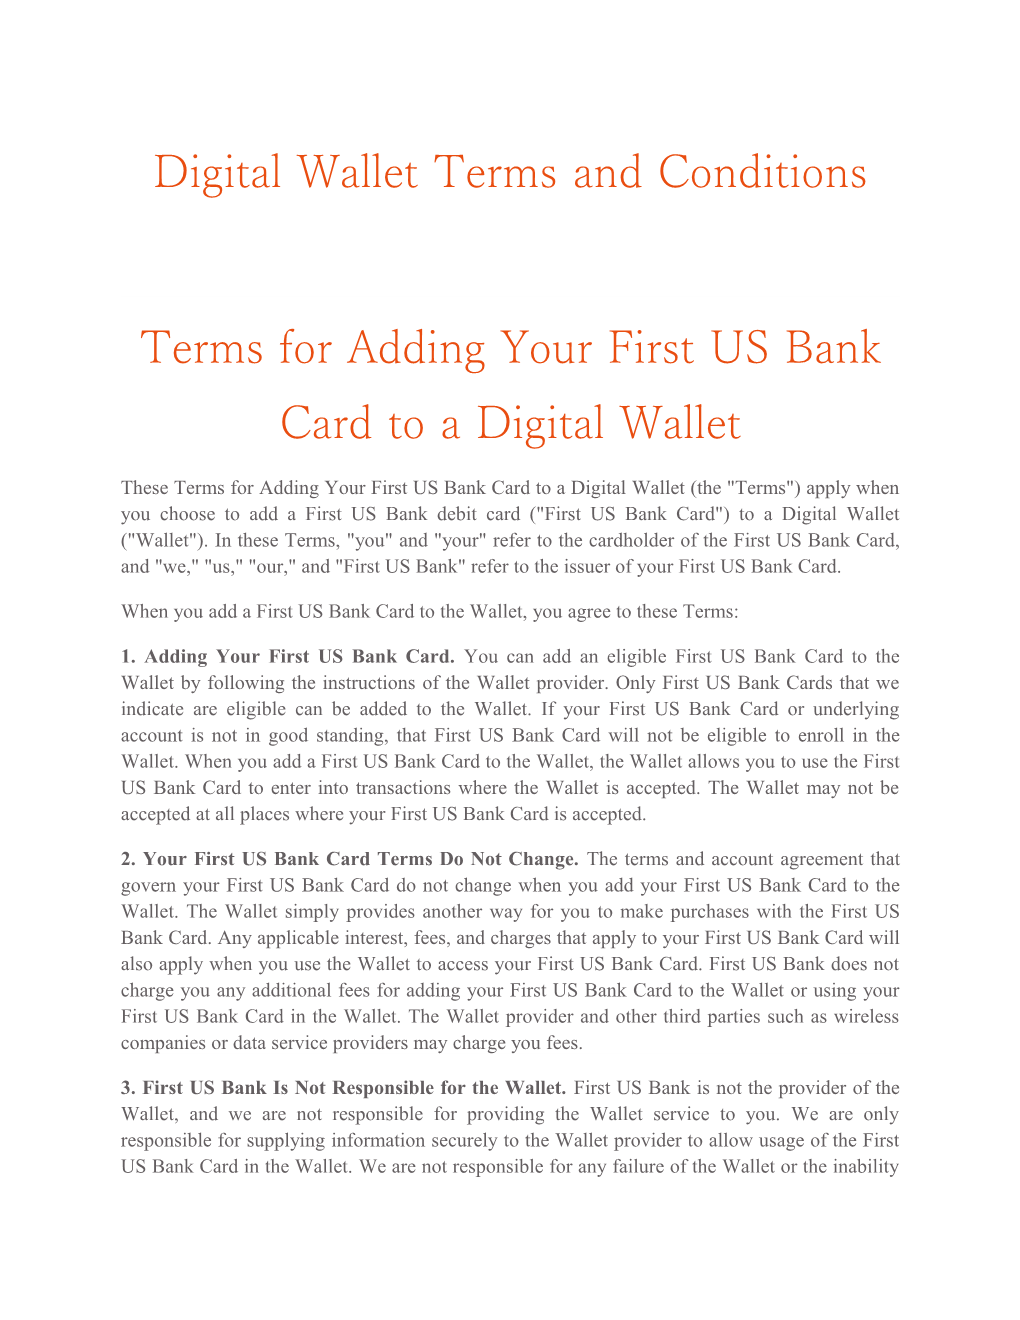 Terms for Adding Your First US Bank Card to a Digital Wallet